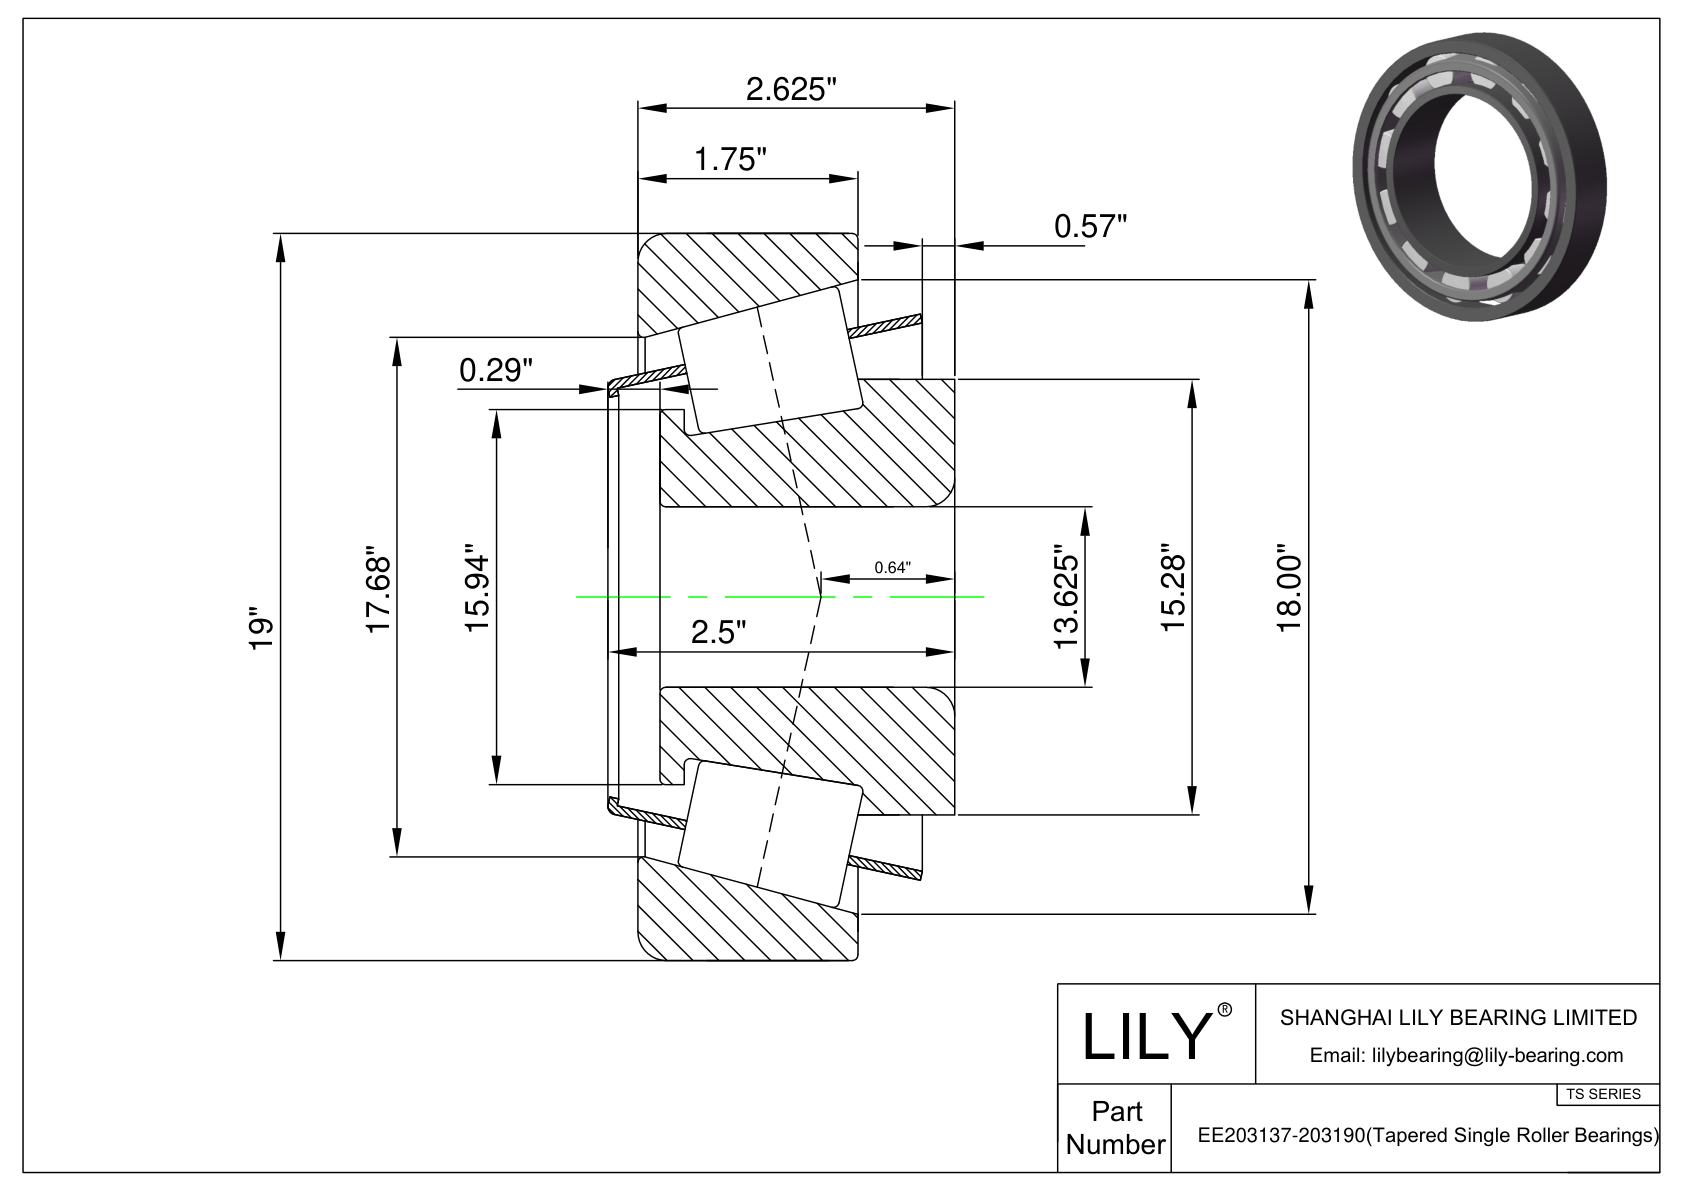 EE203137-203190 TS (Tapered Single Roller Bearings) (Imperial) cad drawing